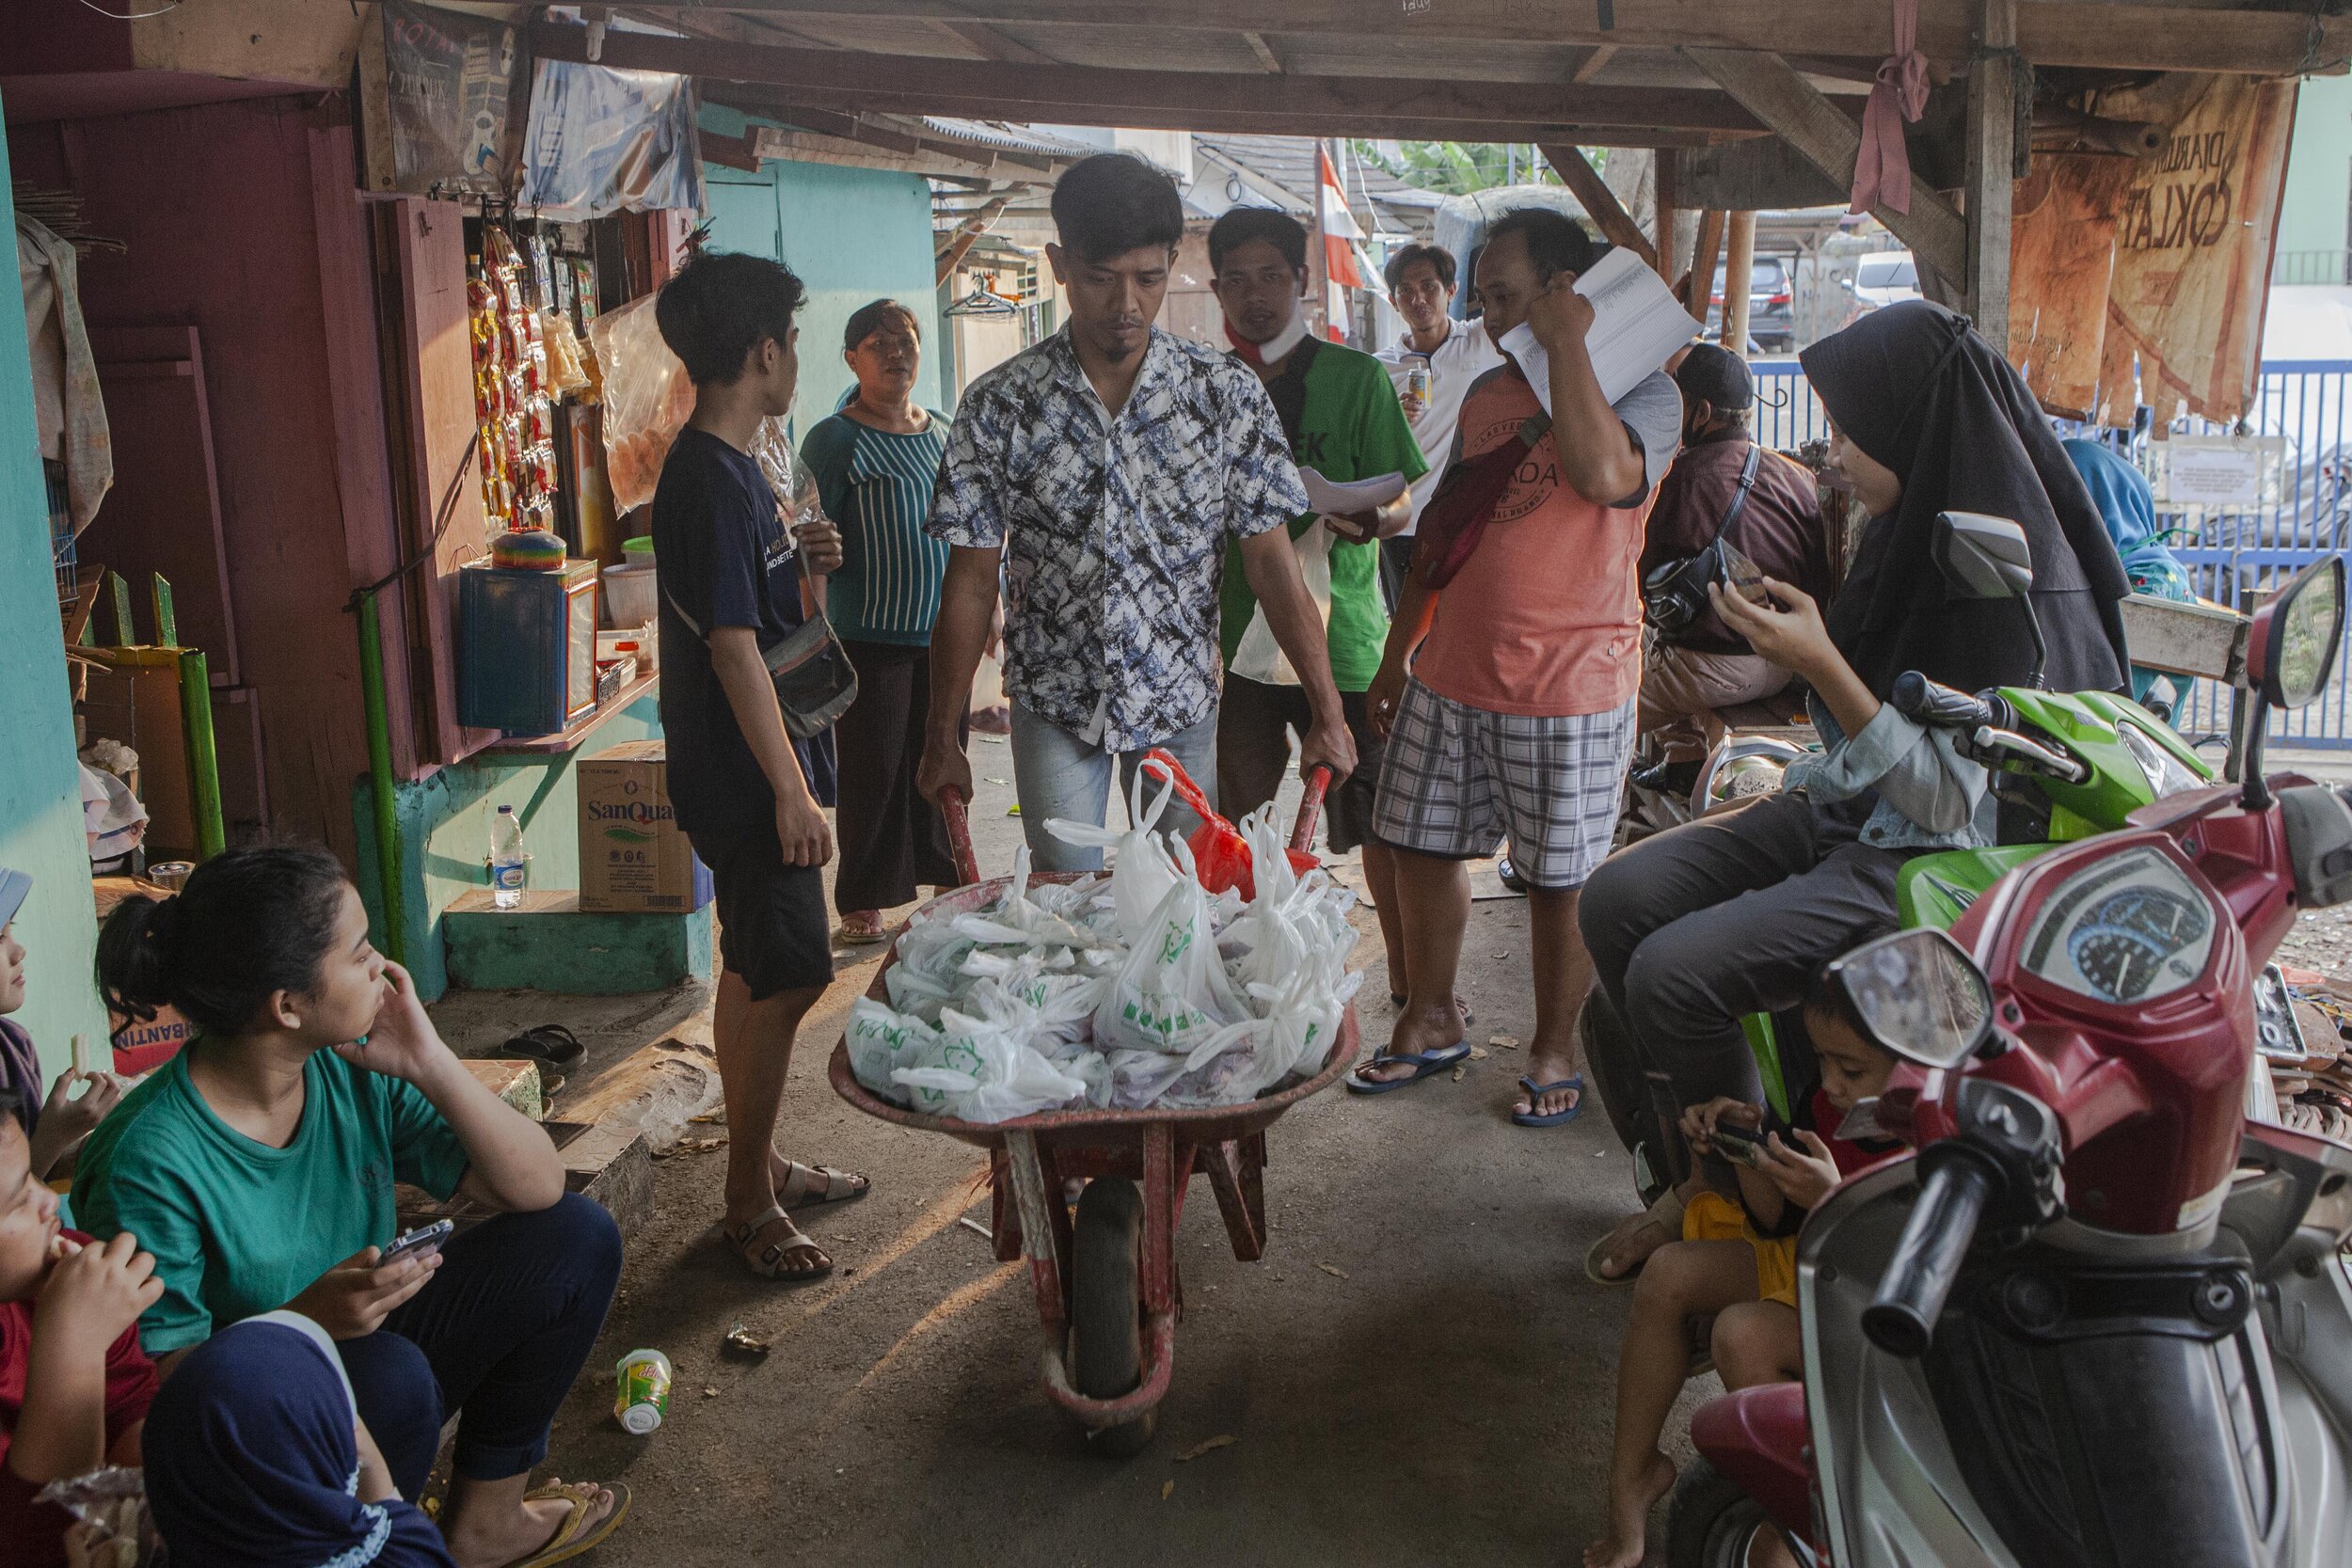  A man uses a push cart to distribute sacrificial meat in a slum area in Jakarta. Photo by Agoes Rudianto. 